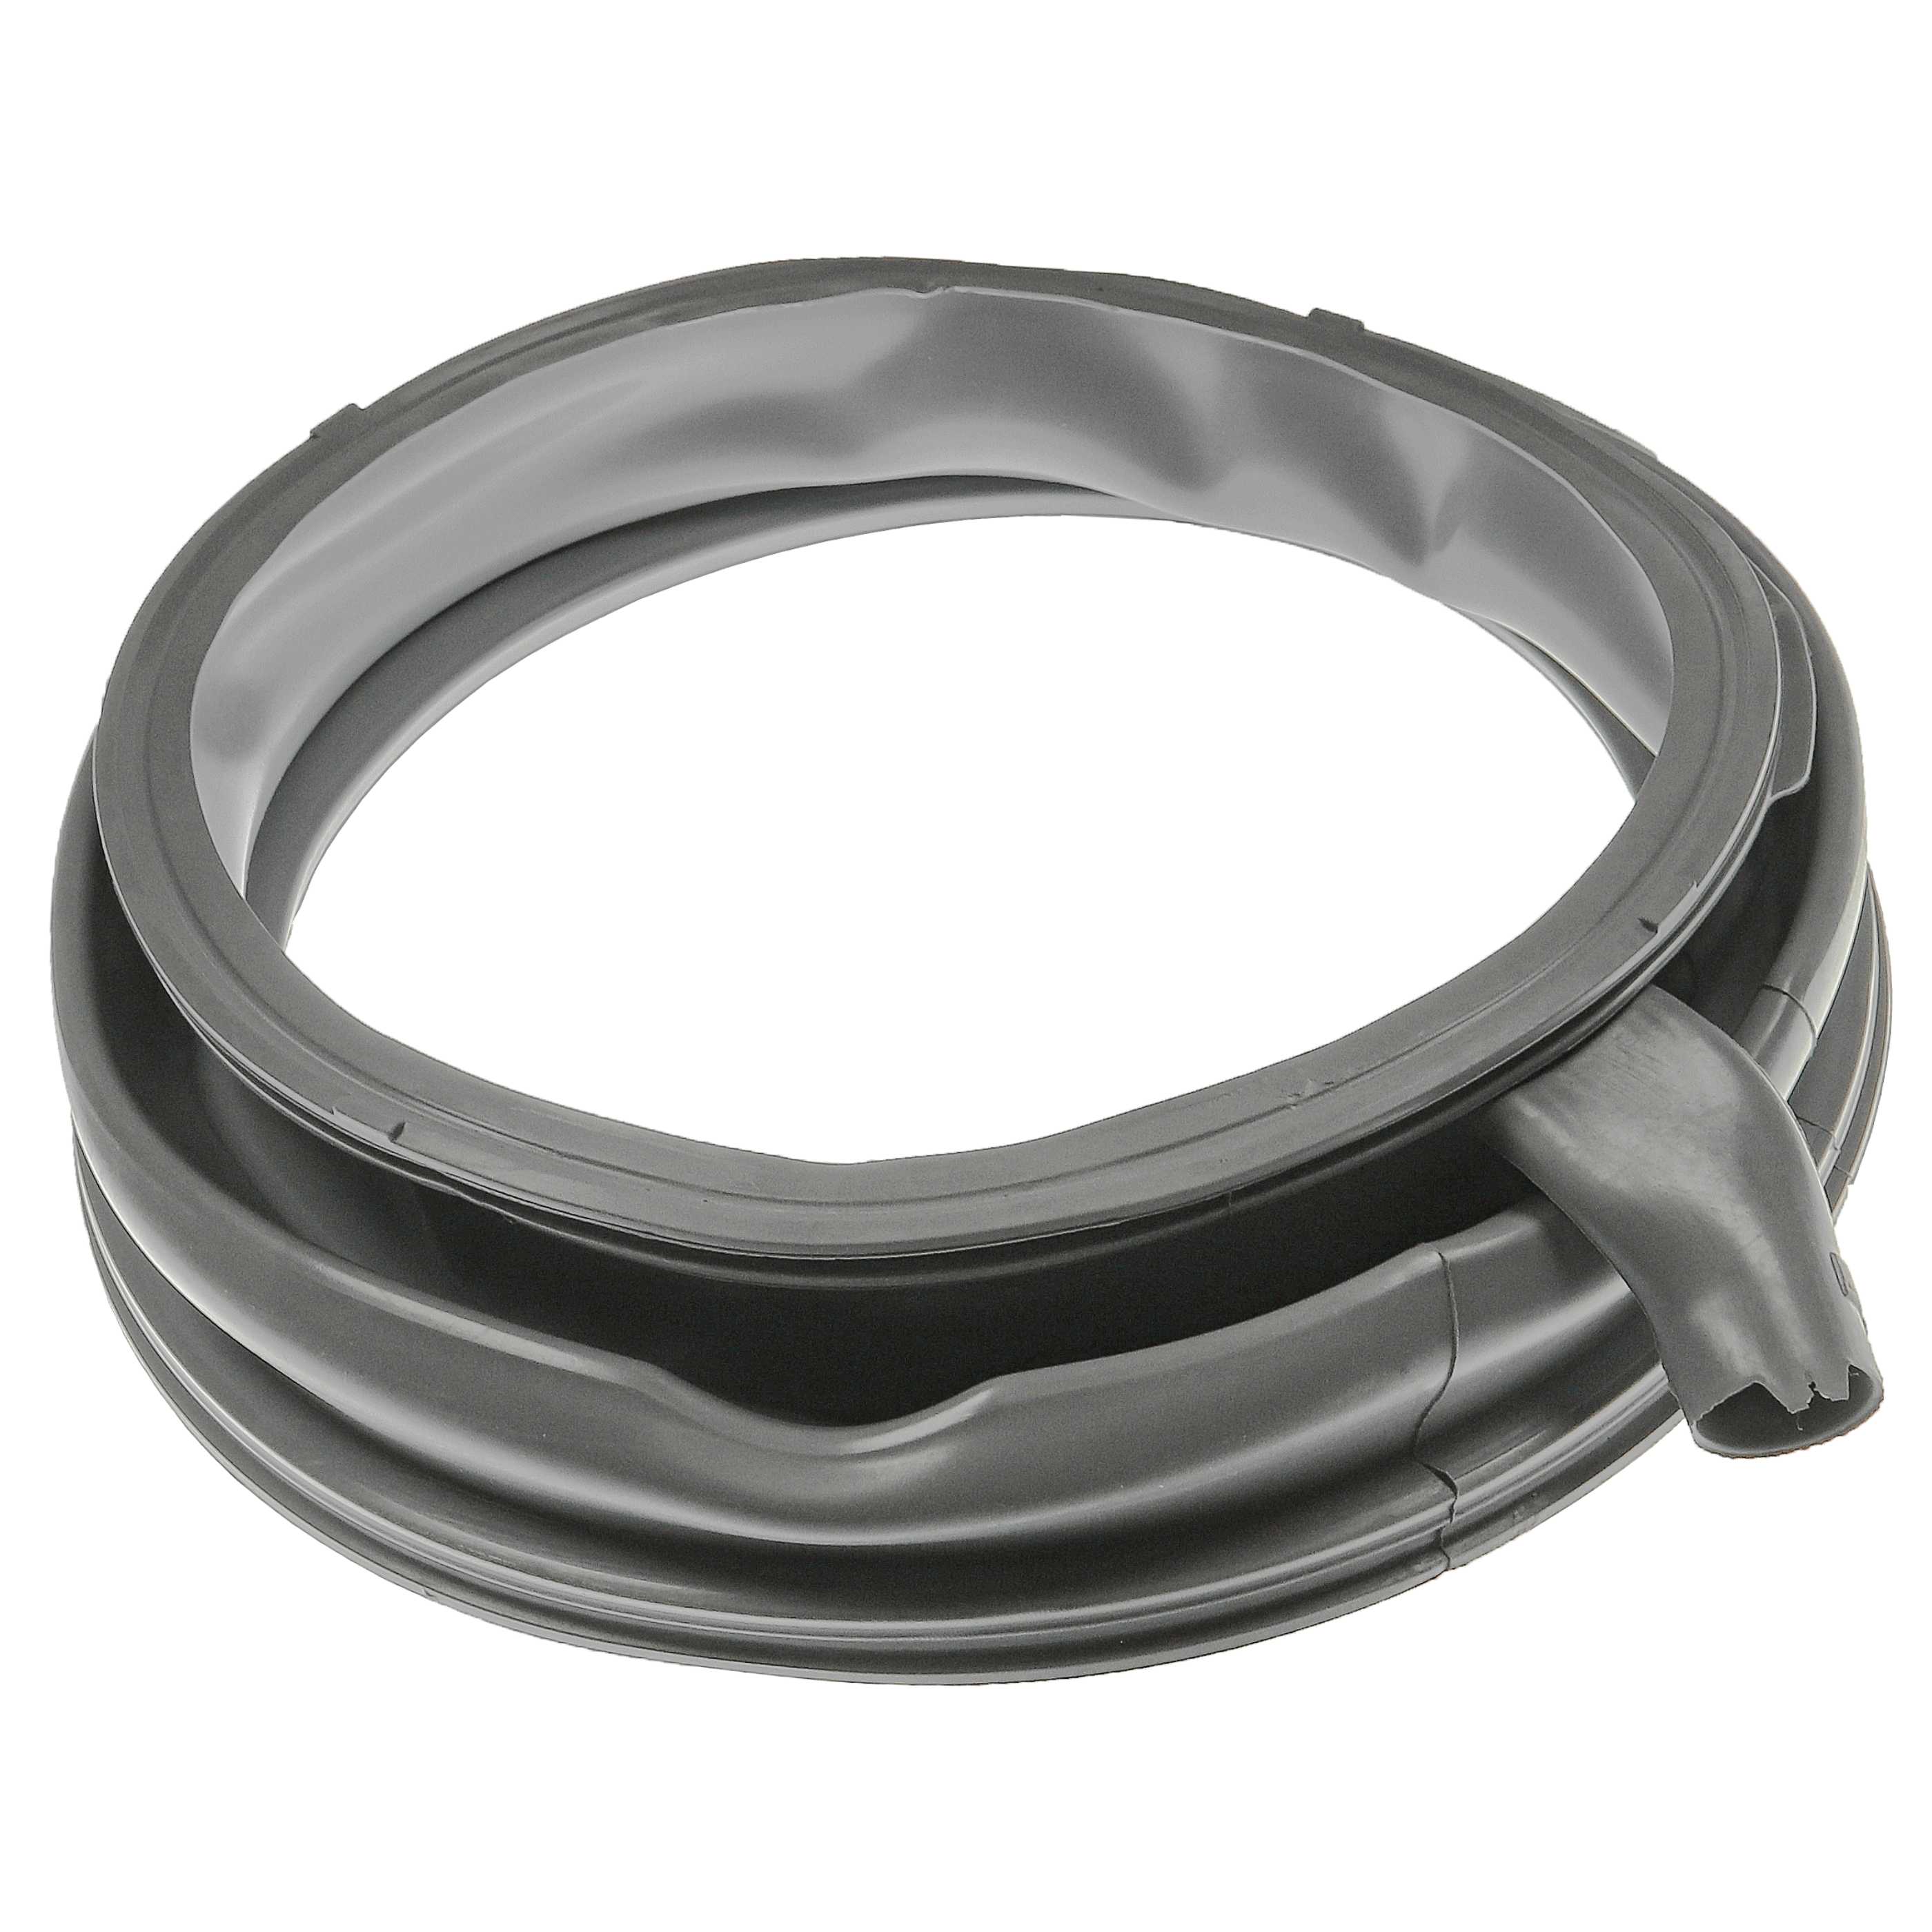 Door Seal replaces BSH 4466-BH, 00686848, 00686004 for Bosch Washing Machine etc.